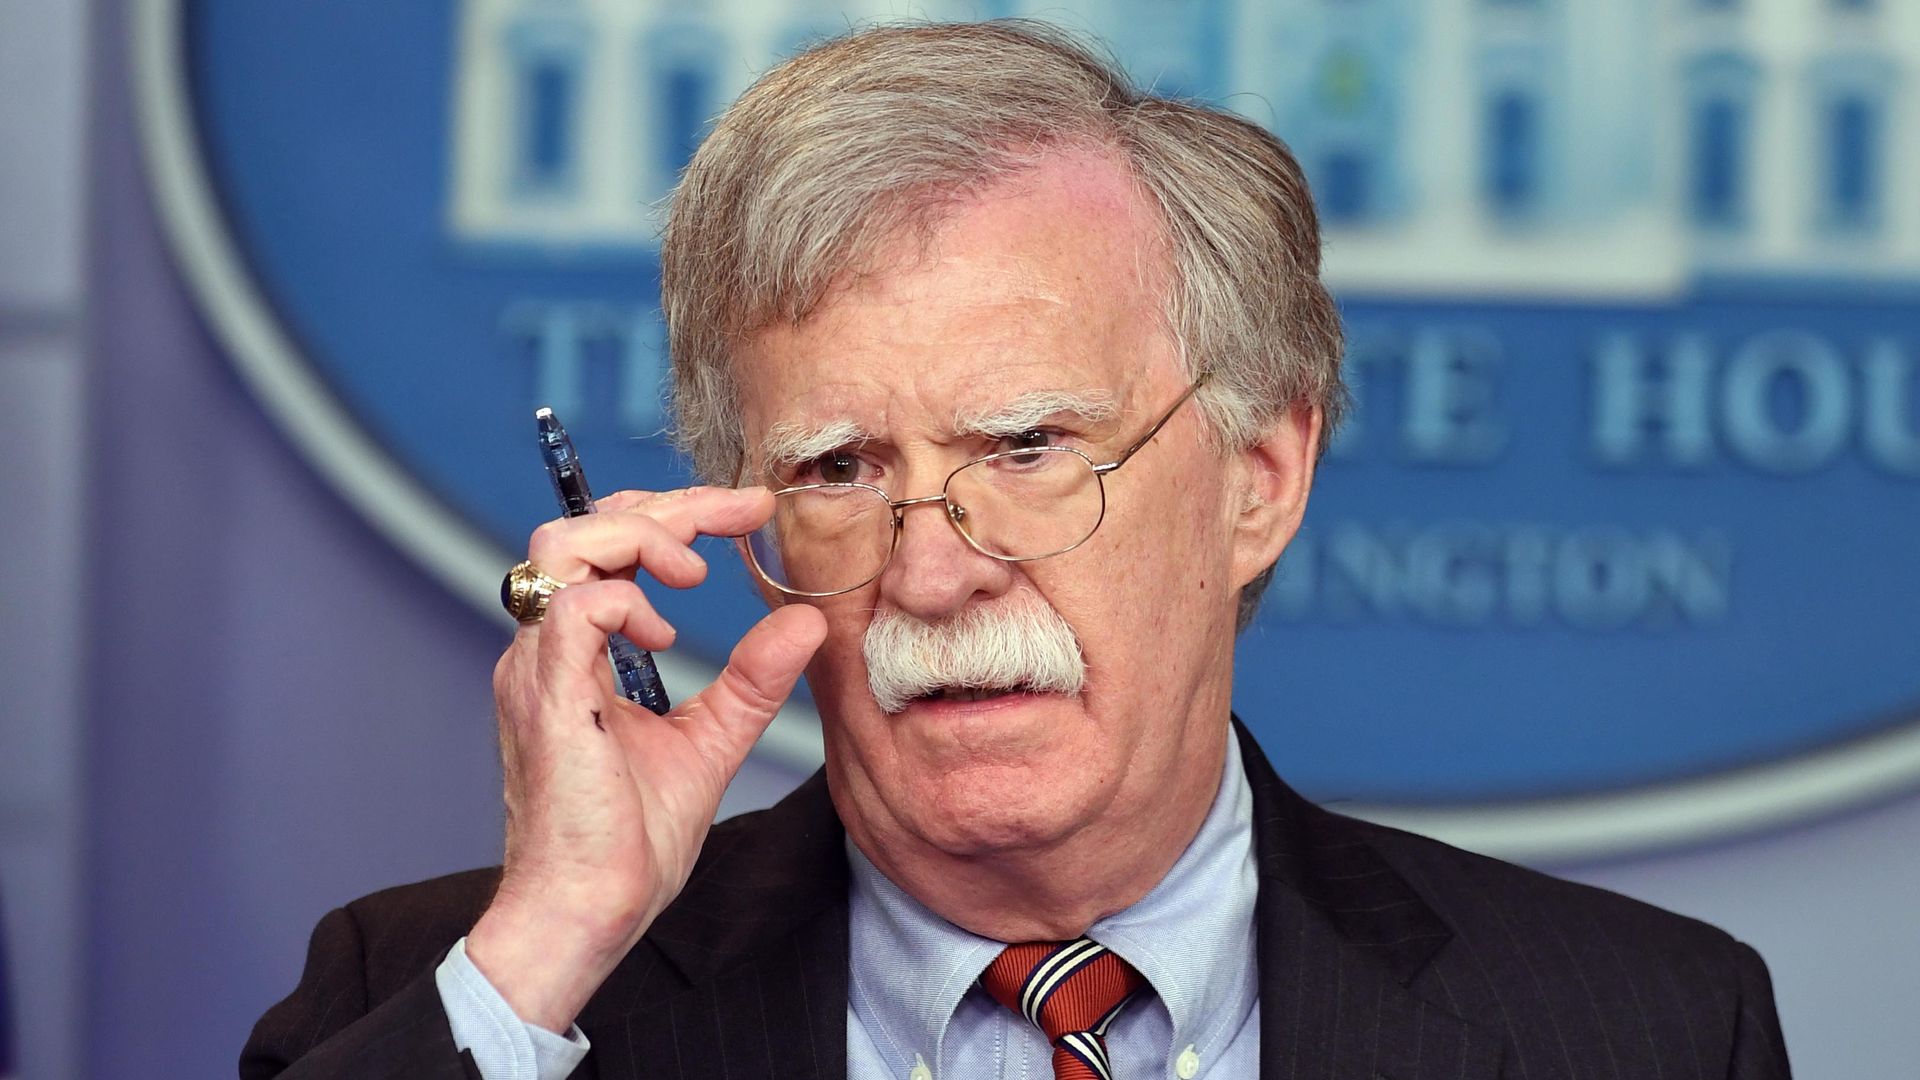 In this image, Bolton adjusts his glasses.